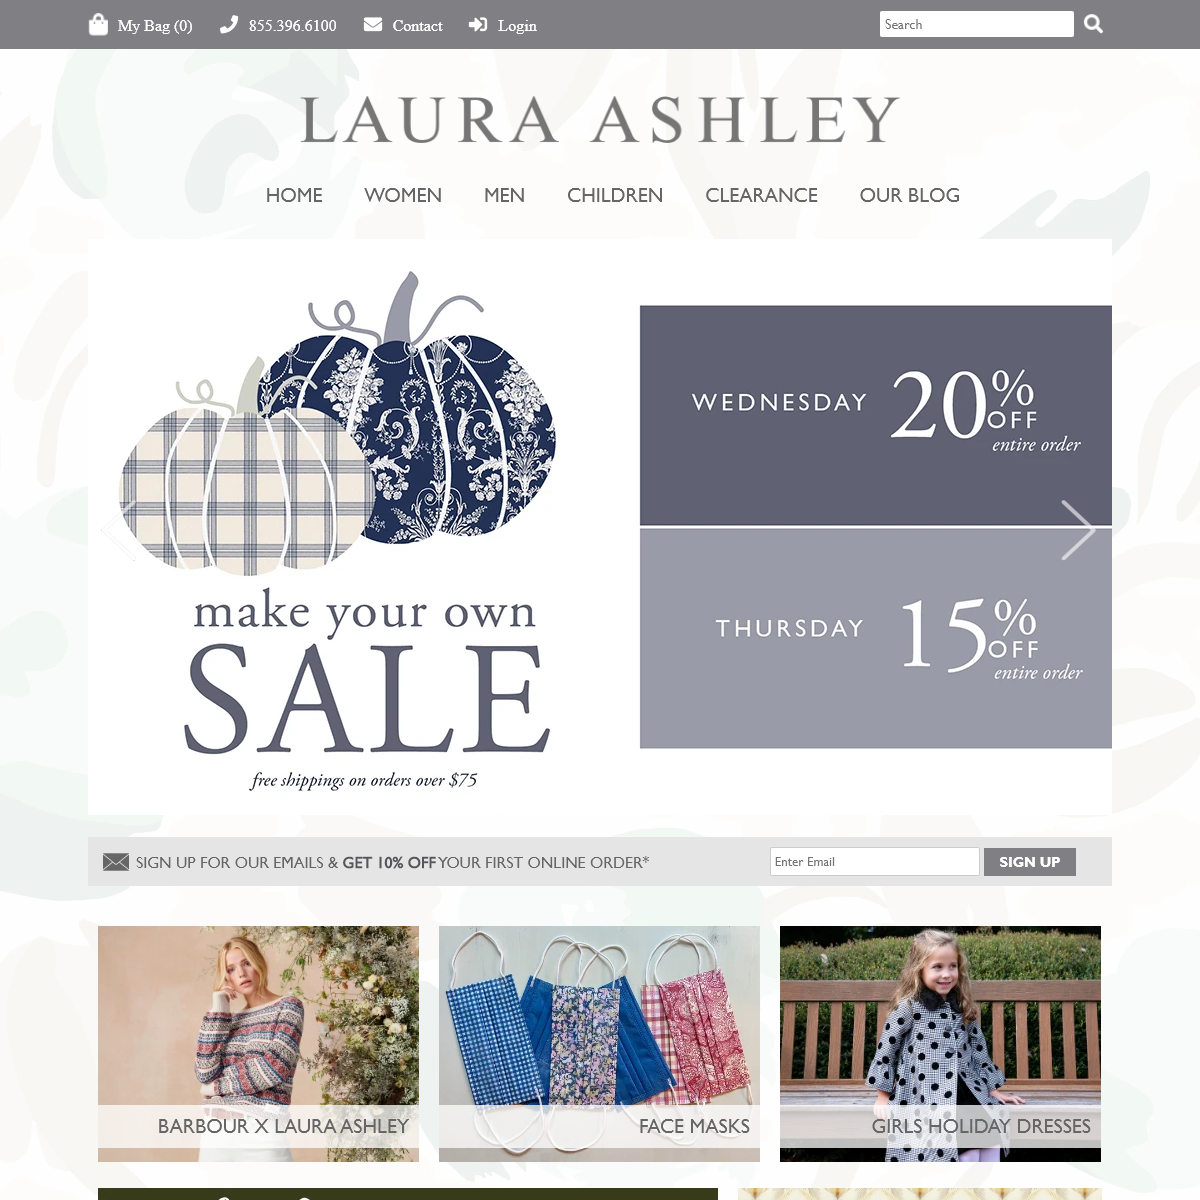 A complete backup of lauraashley.com